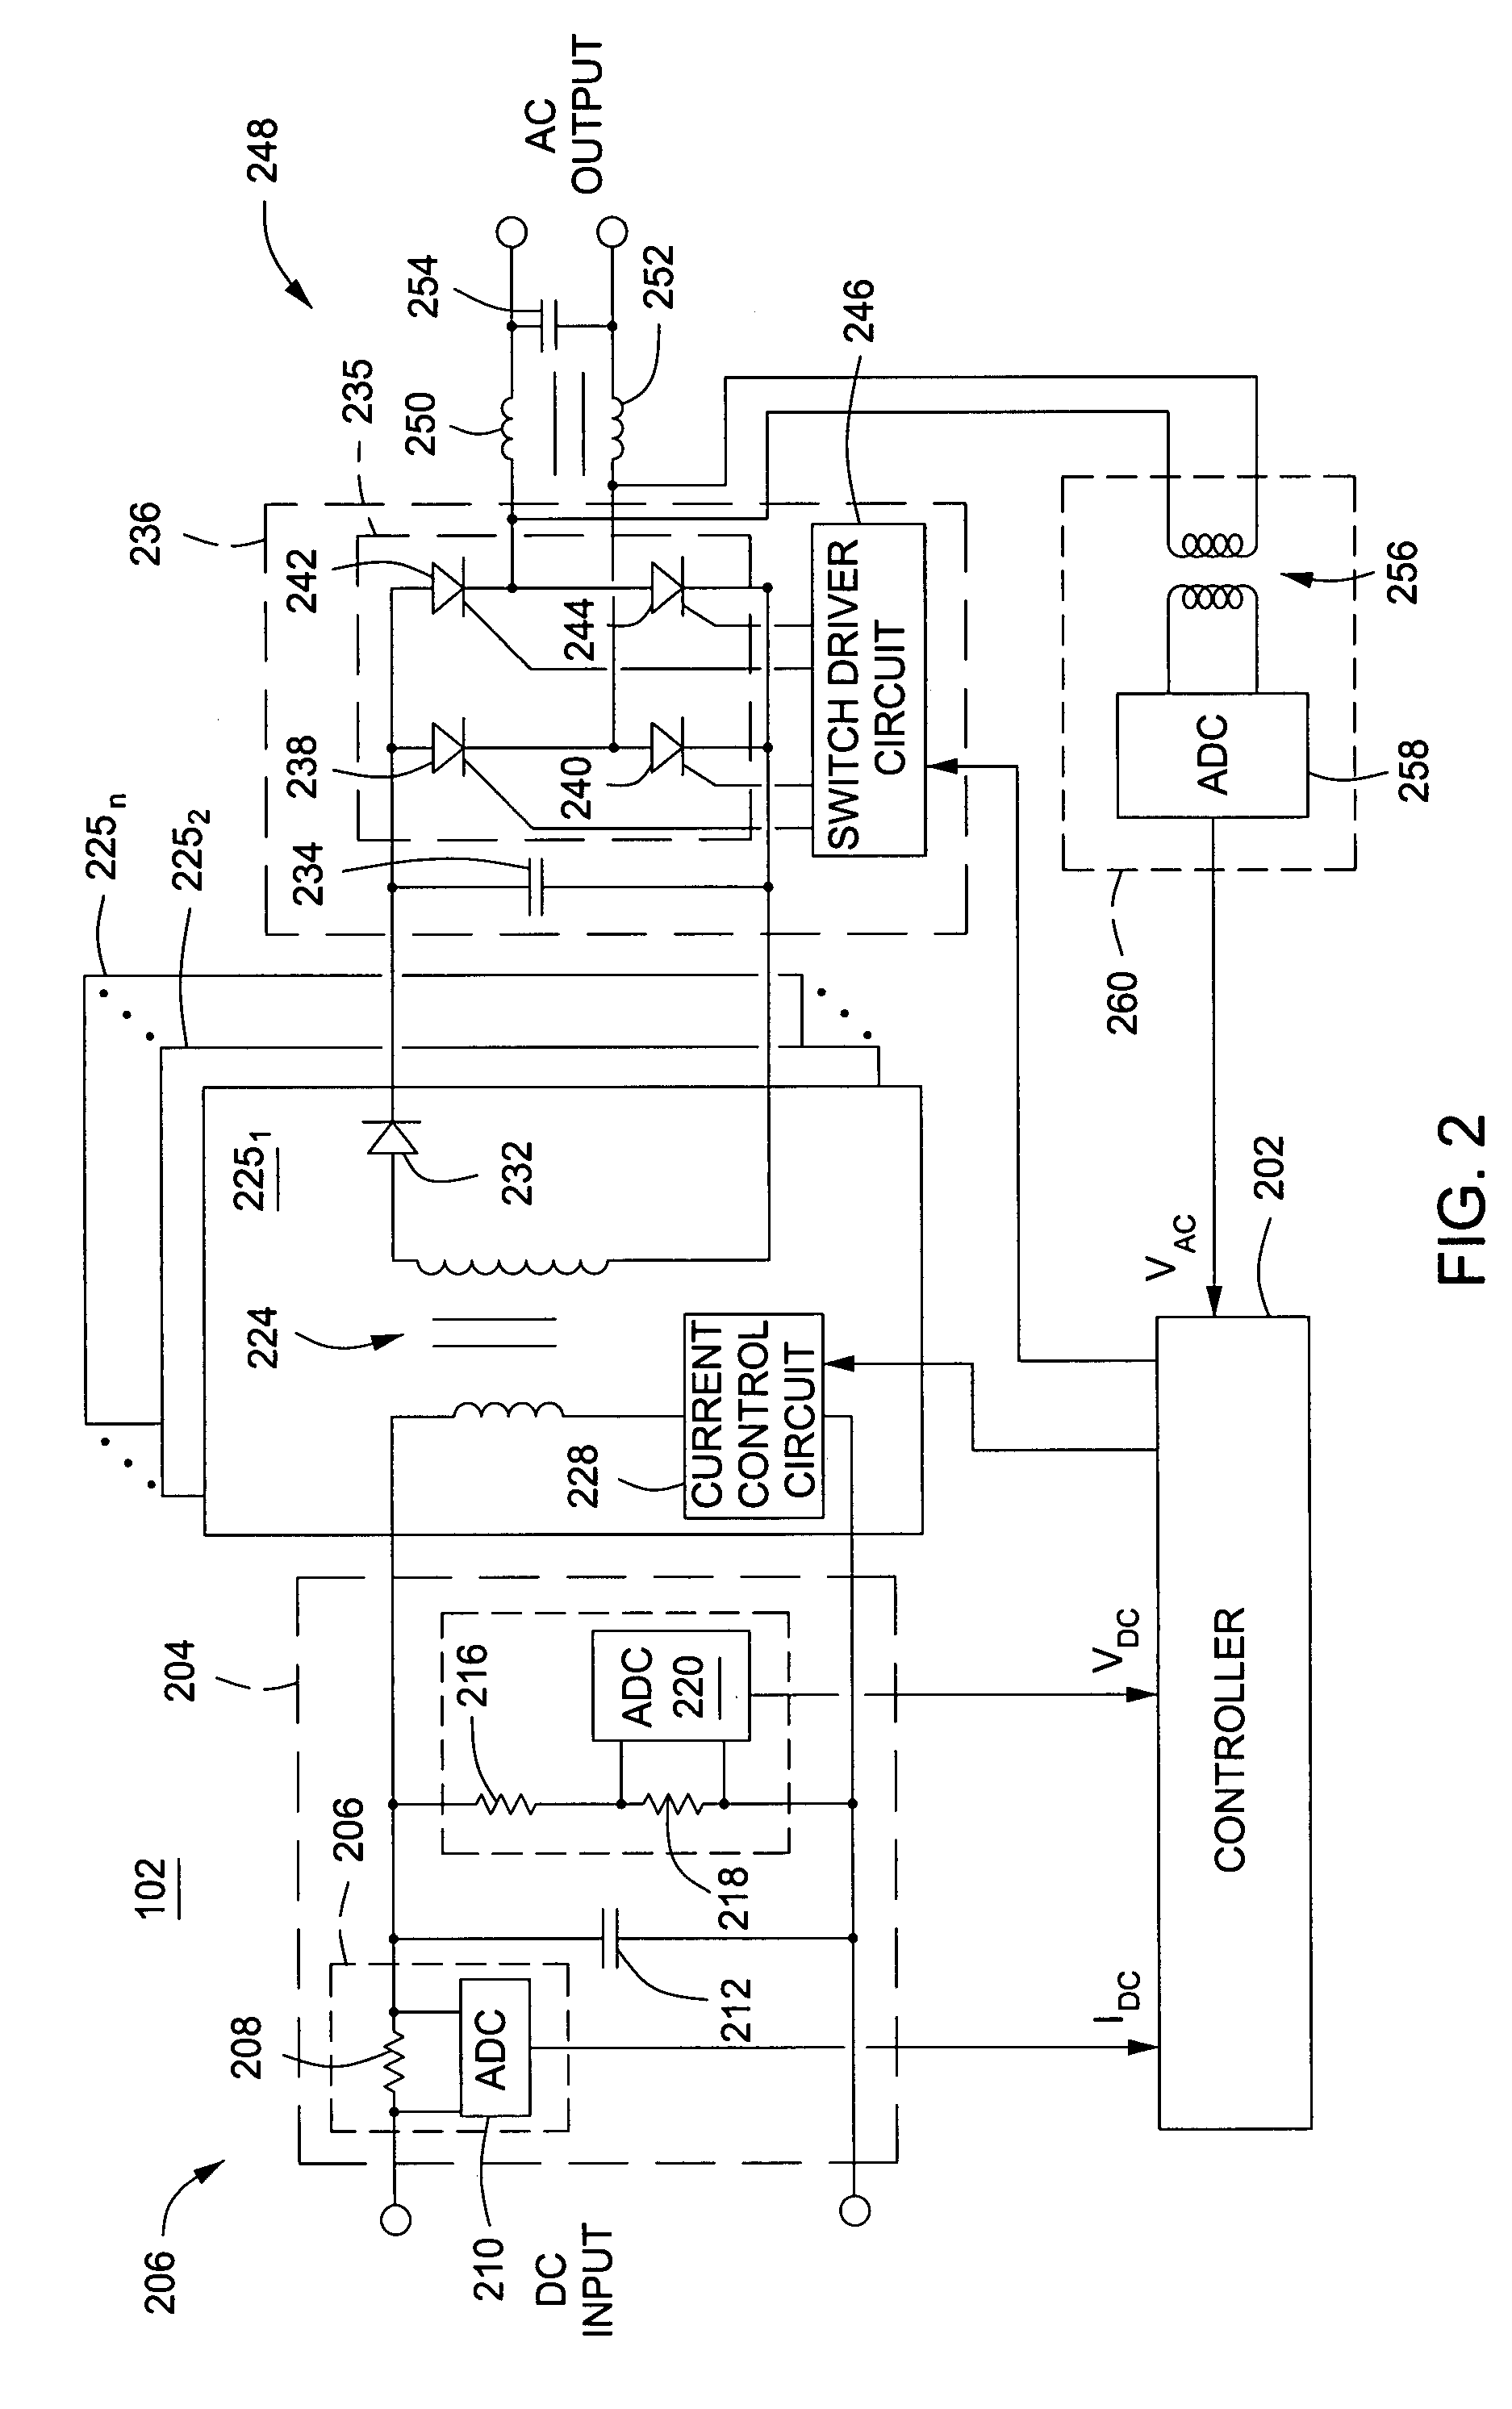 Method and apparatus for converting direct current to alternating current